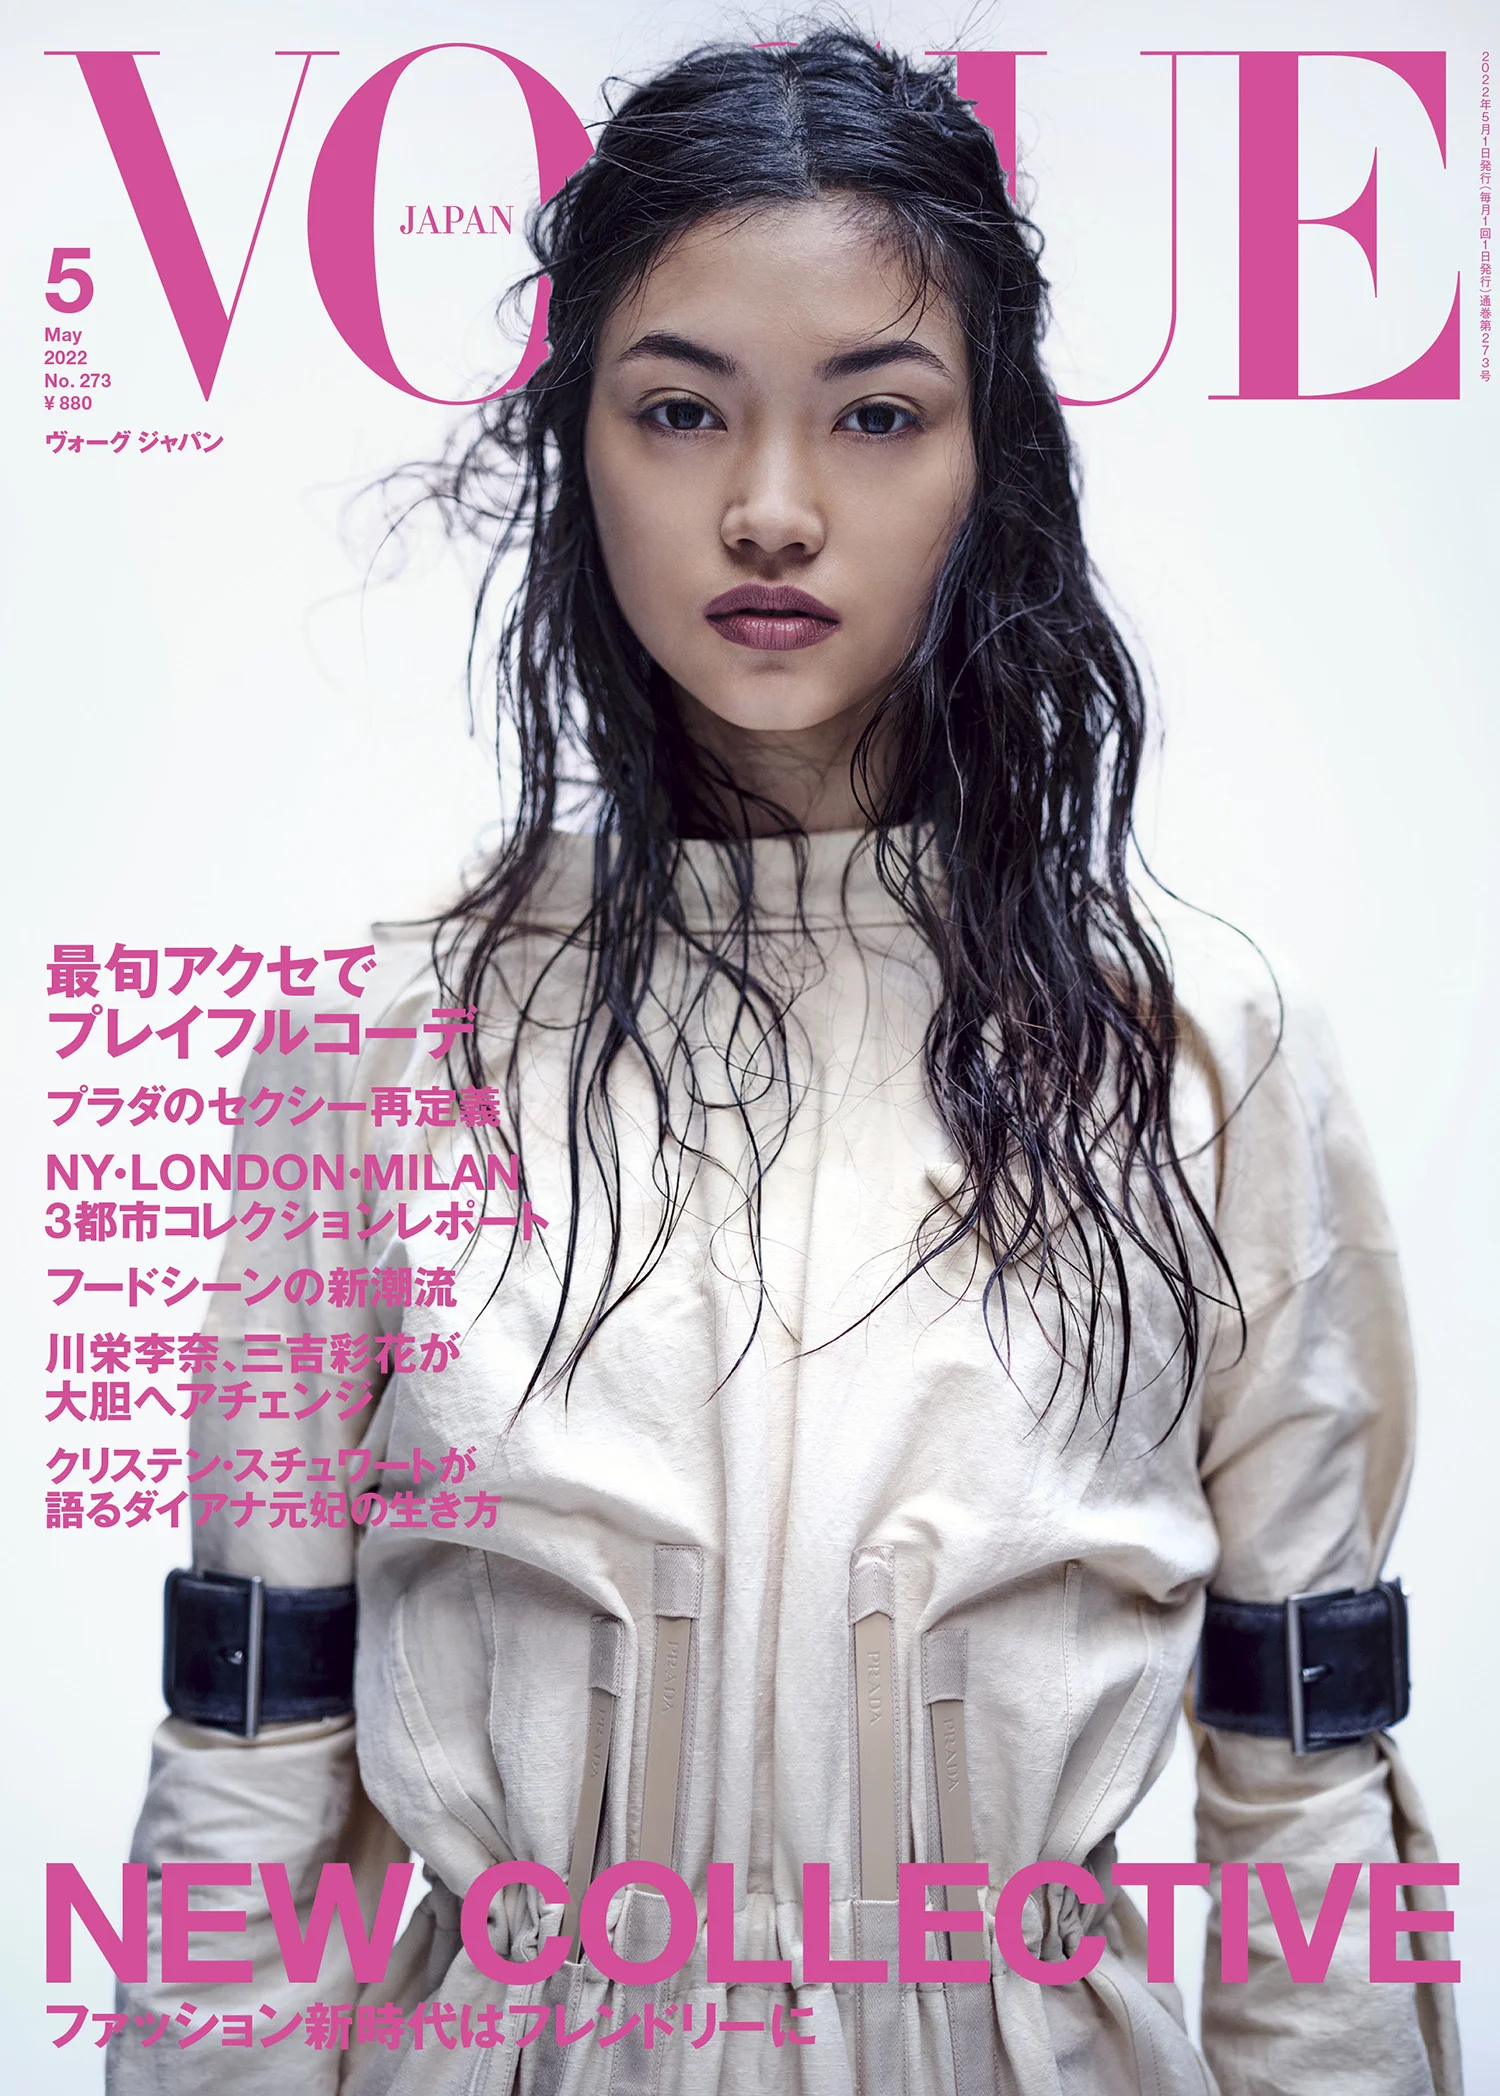 Mika Schneider covers Vogue Japan May 2022 by Nathaniel Goldberg